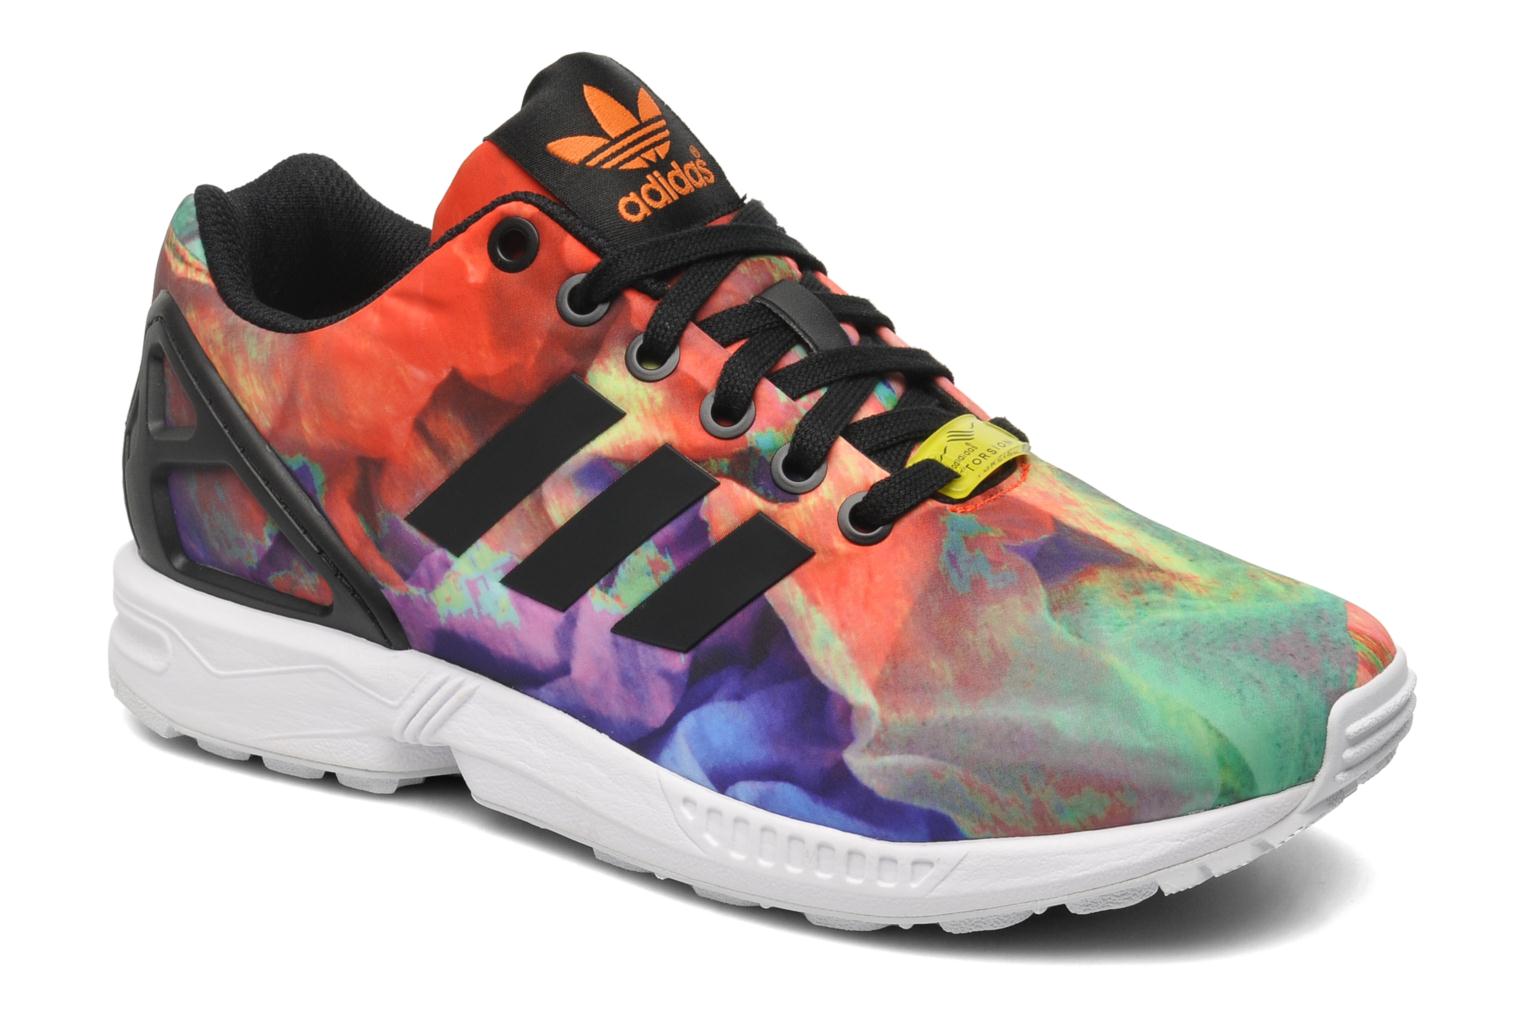 Adidas Originals Zx Flux W Trainers In Multicolor At Uk 192997 2491